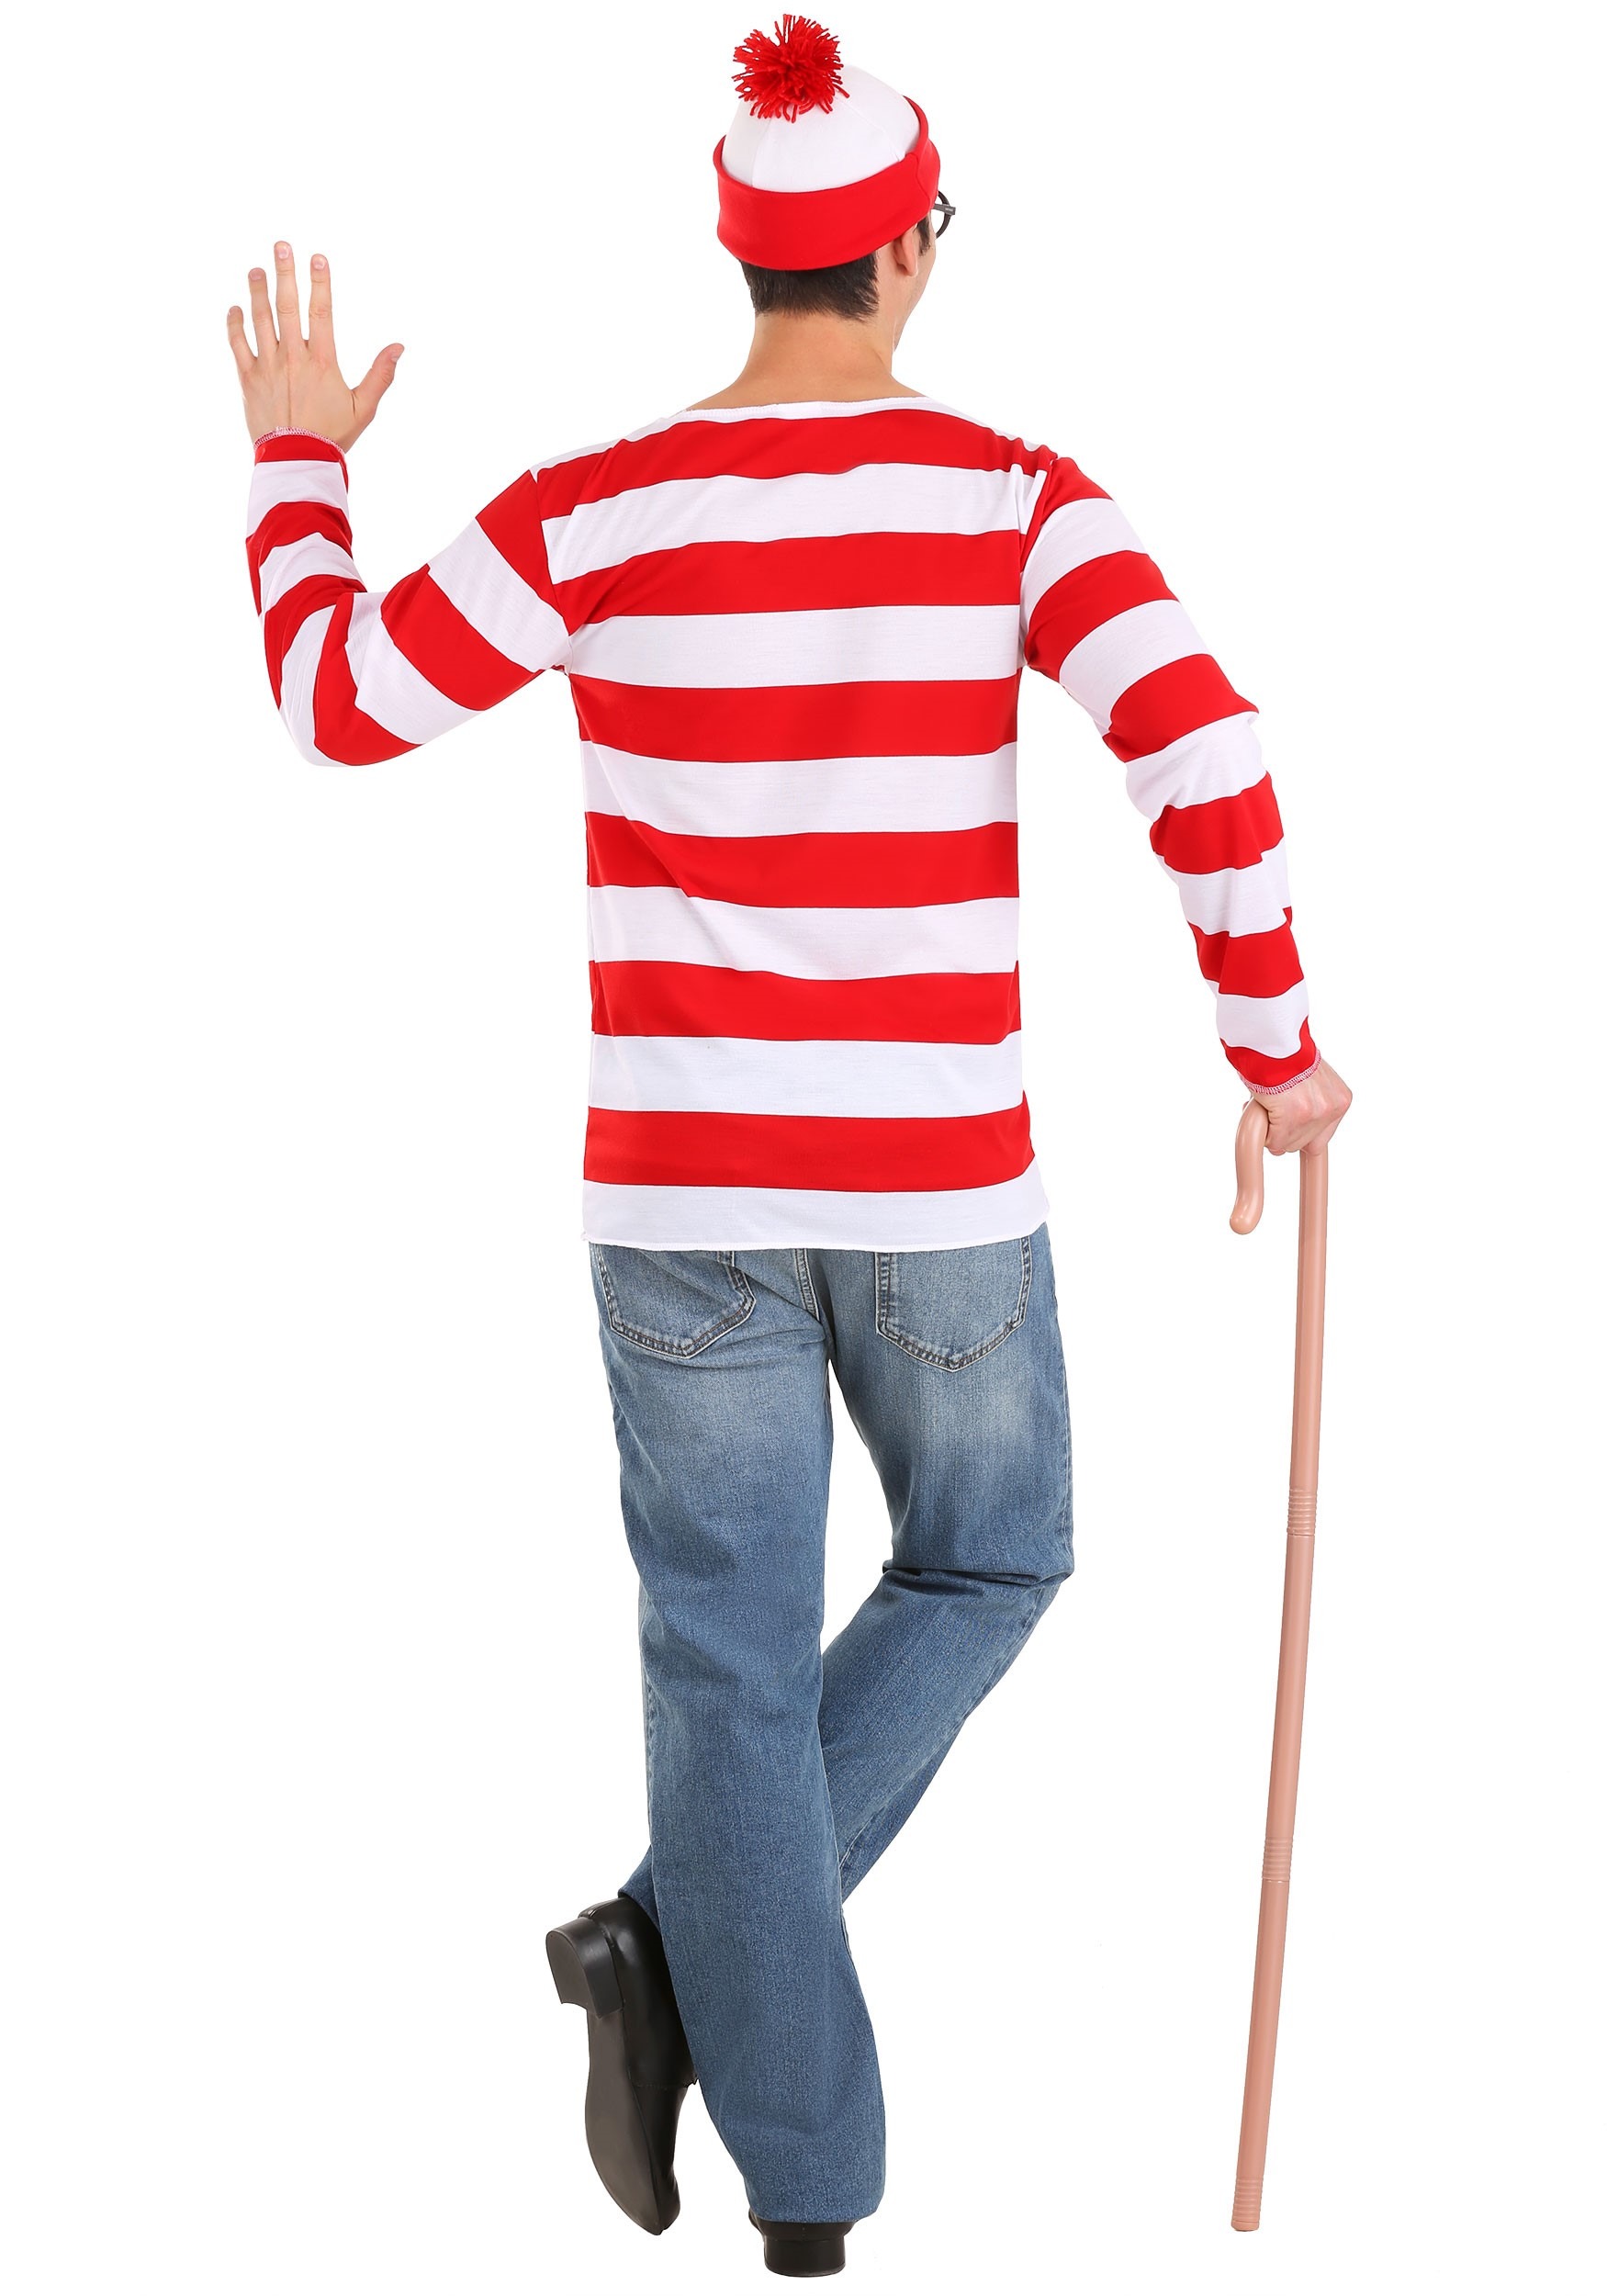 Where’s Waldo Fancy Dress Costume , Exclusive Sizes Available